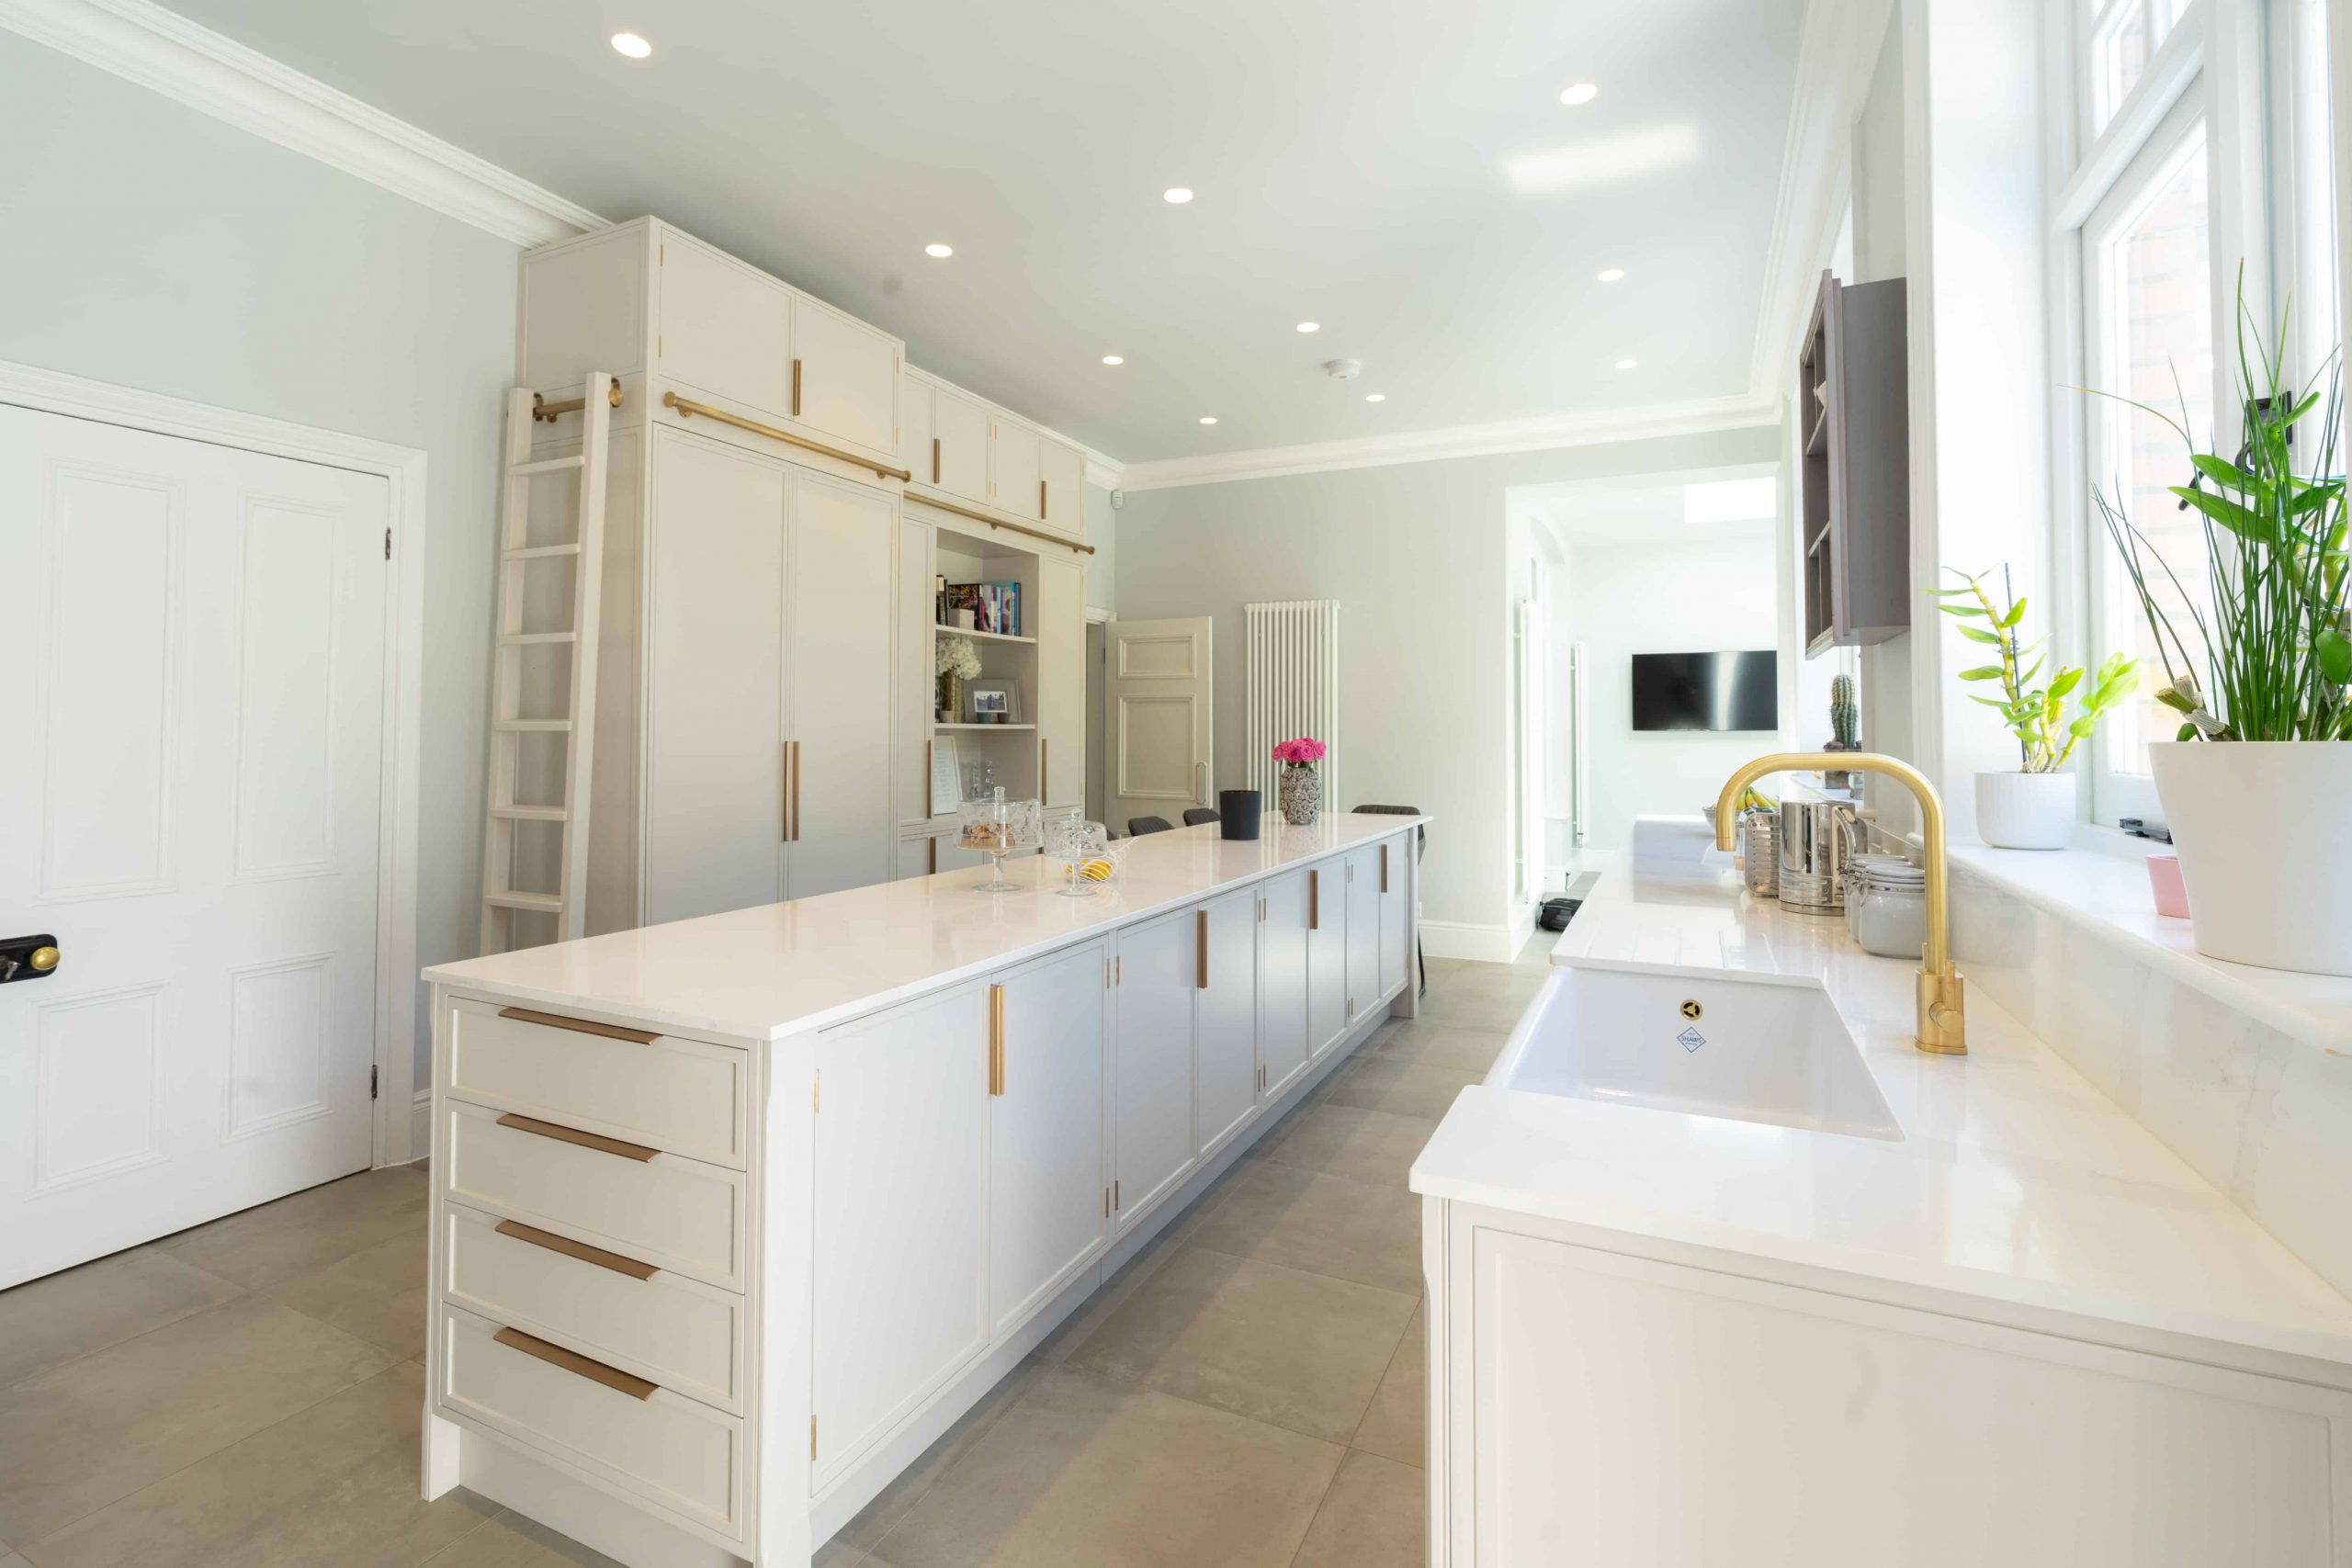 What makes bespoke kitchens different from off the shelf kitchens?